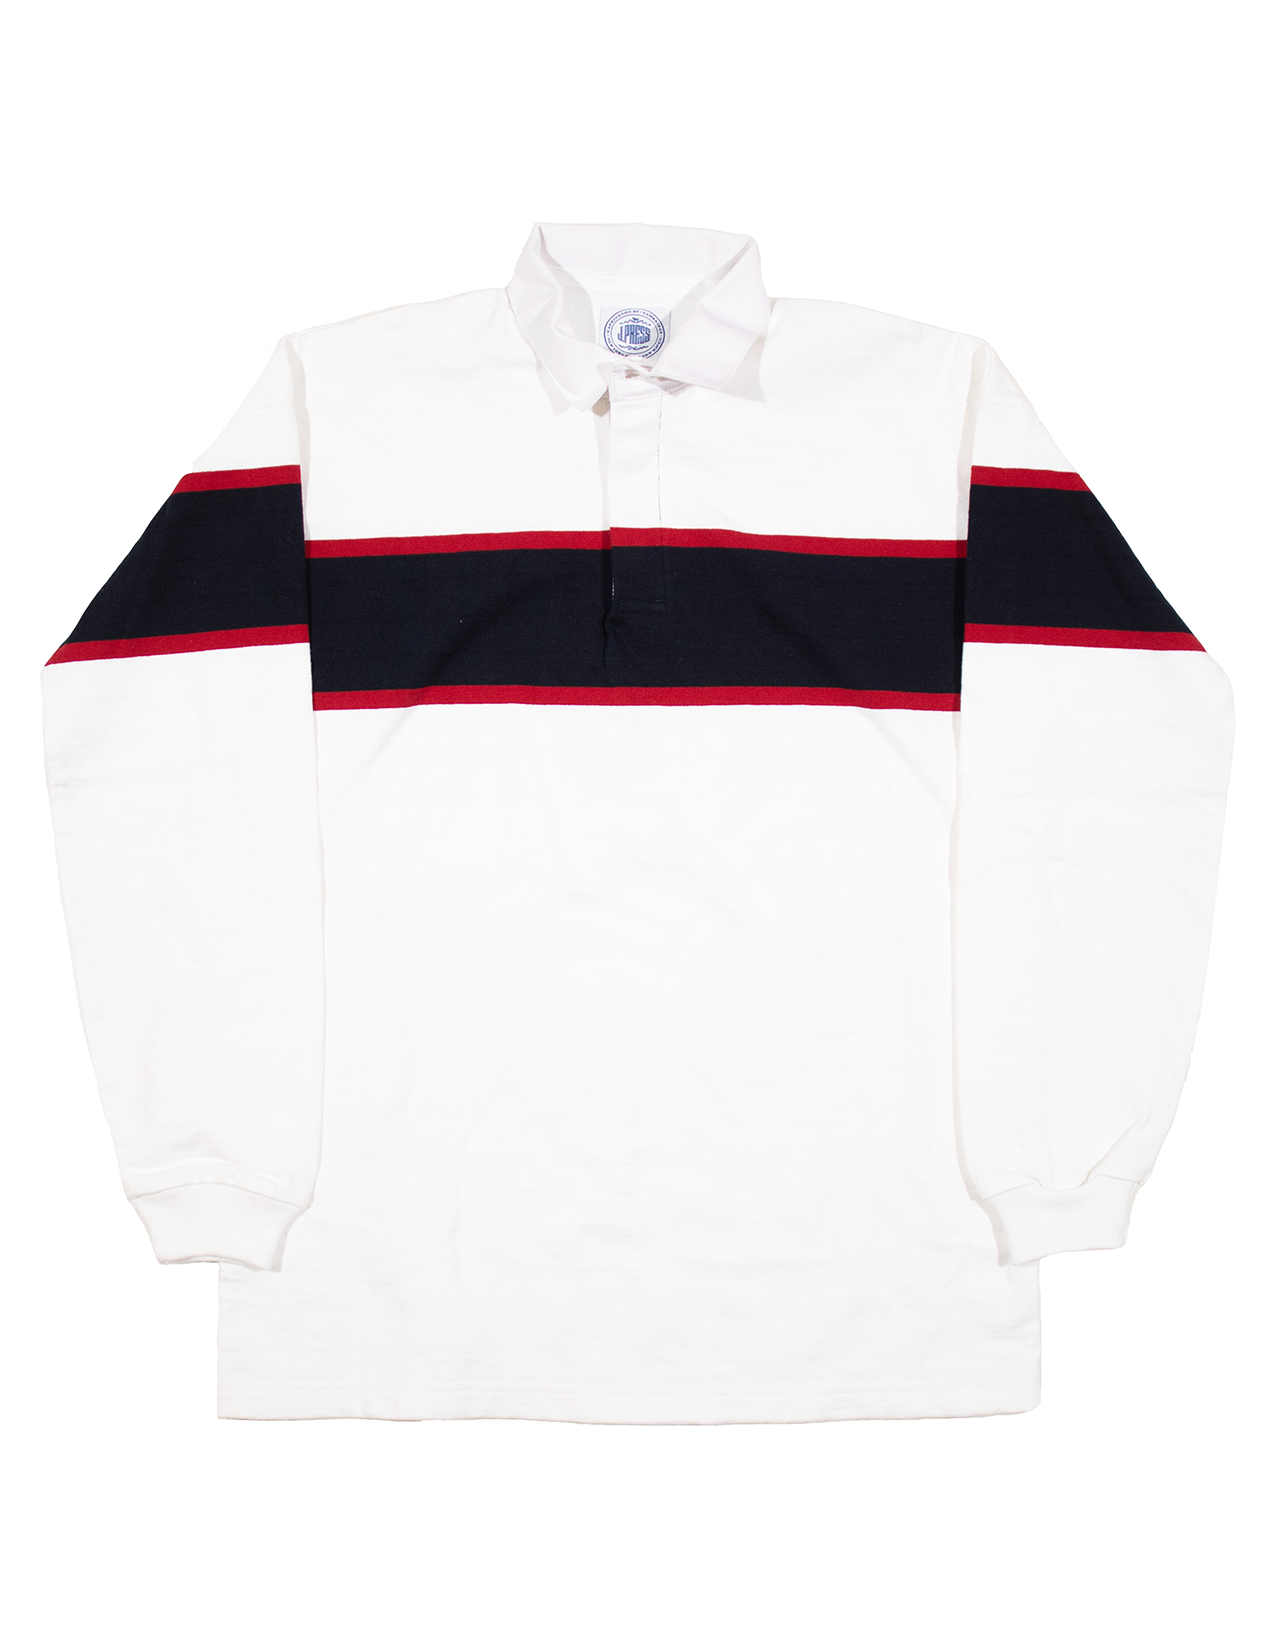 STRIPED RUGBY SHIRT - WHITE/RED/NAVY